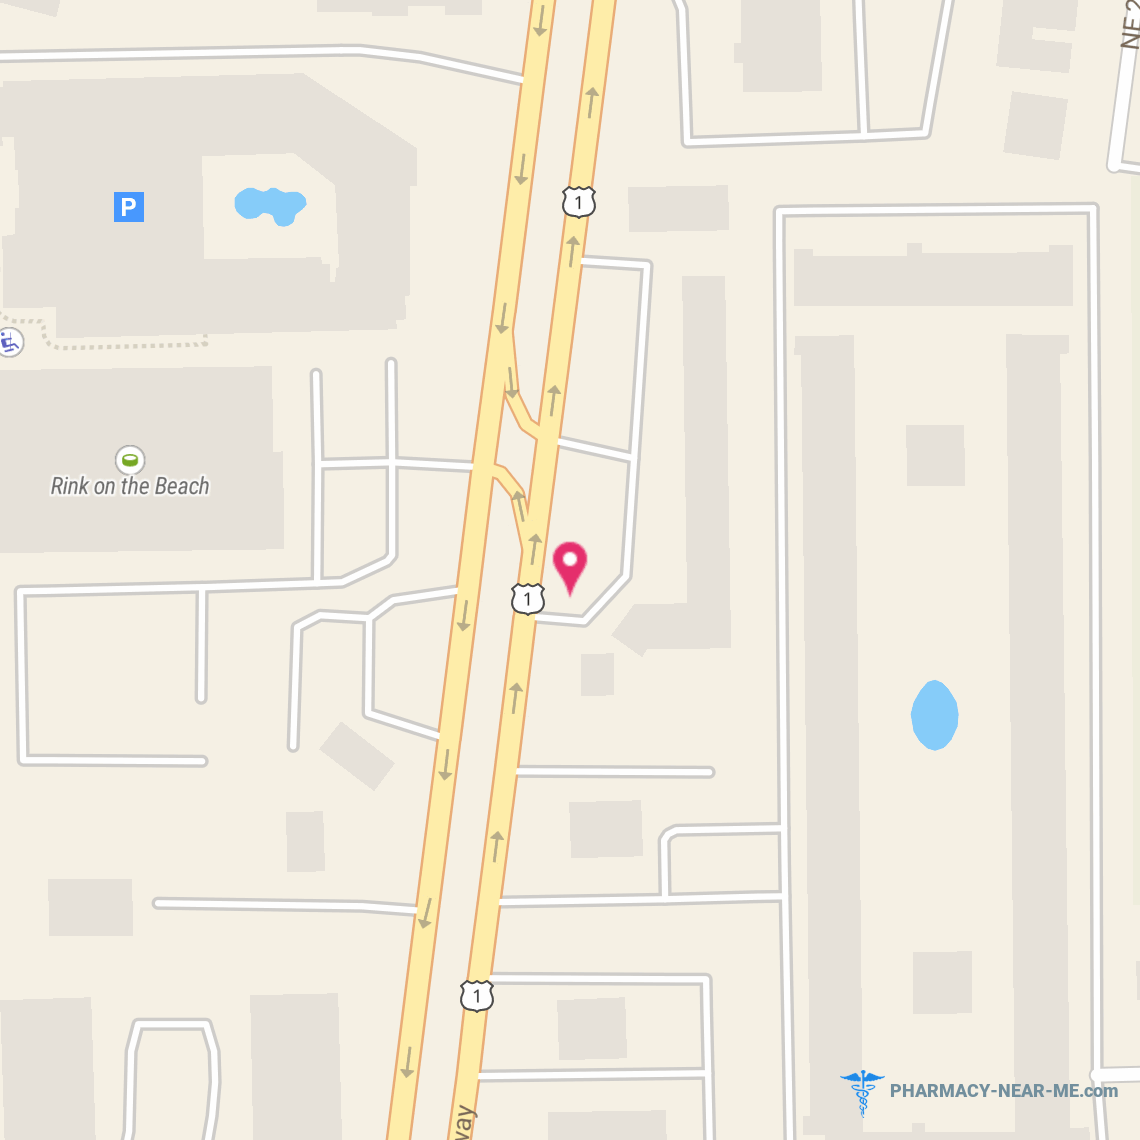 PUBLIX PHARMACY #0056 - Pharmacy Hours, Phone, Reviews & Information: 3700 North Federal Highway, Lighthouse Point, Florida 33064, United States